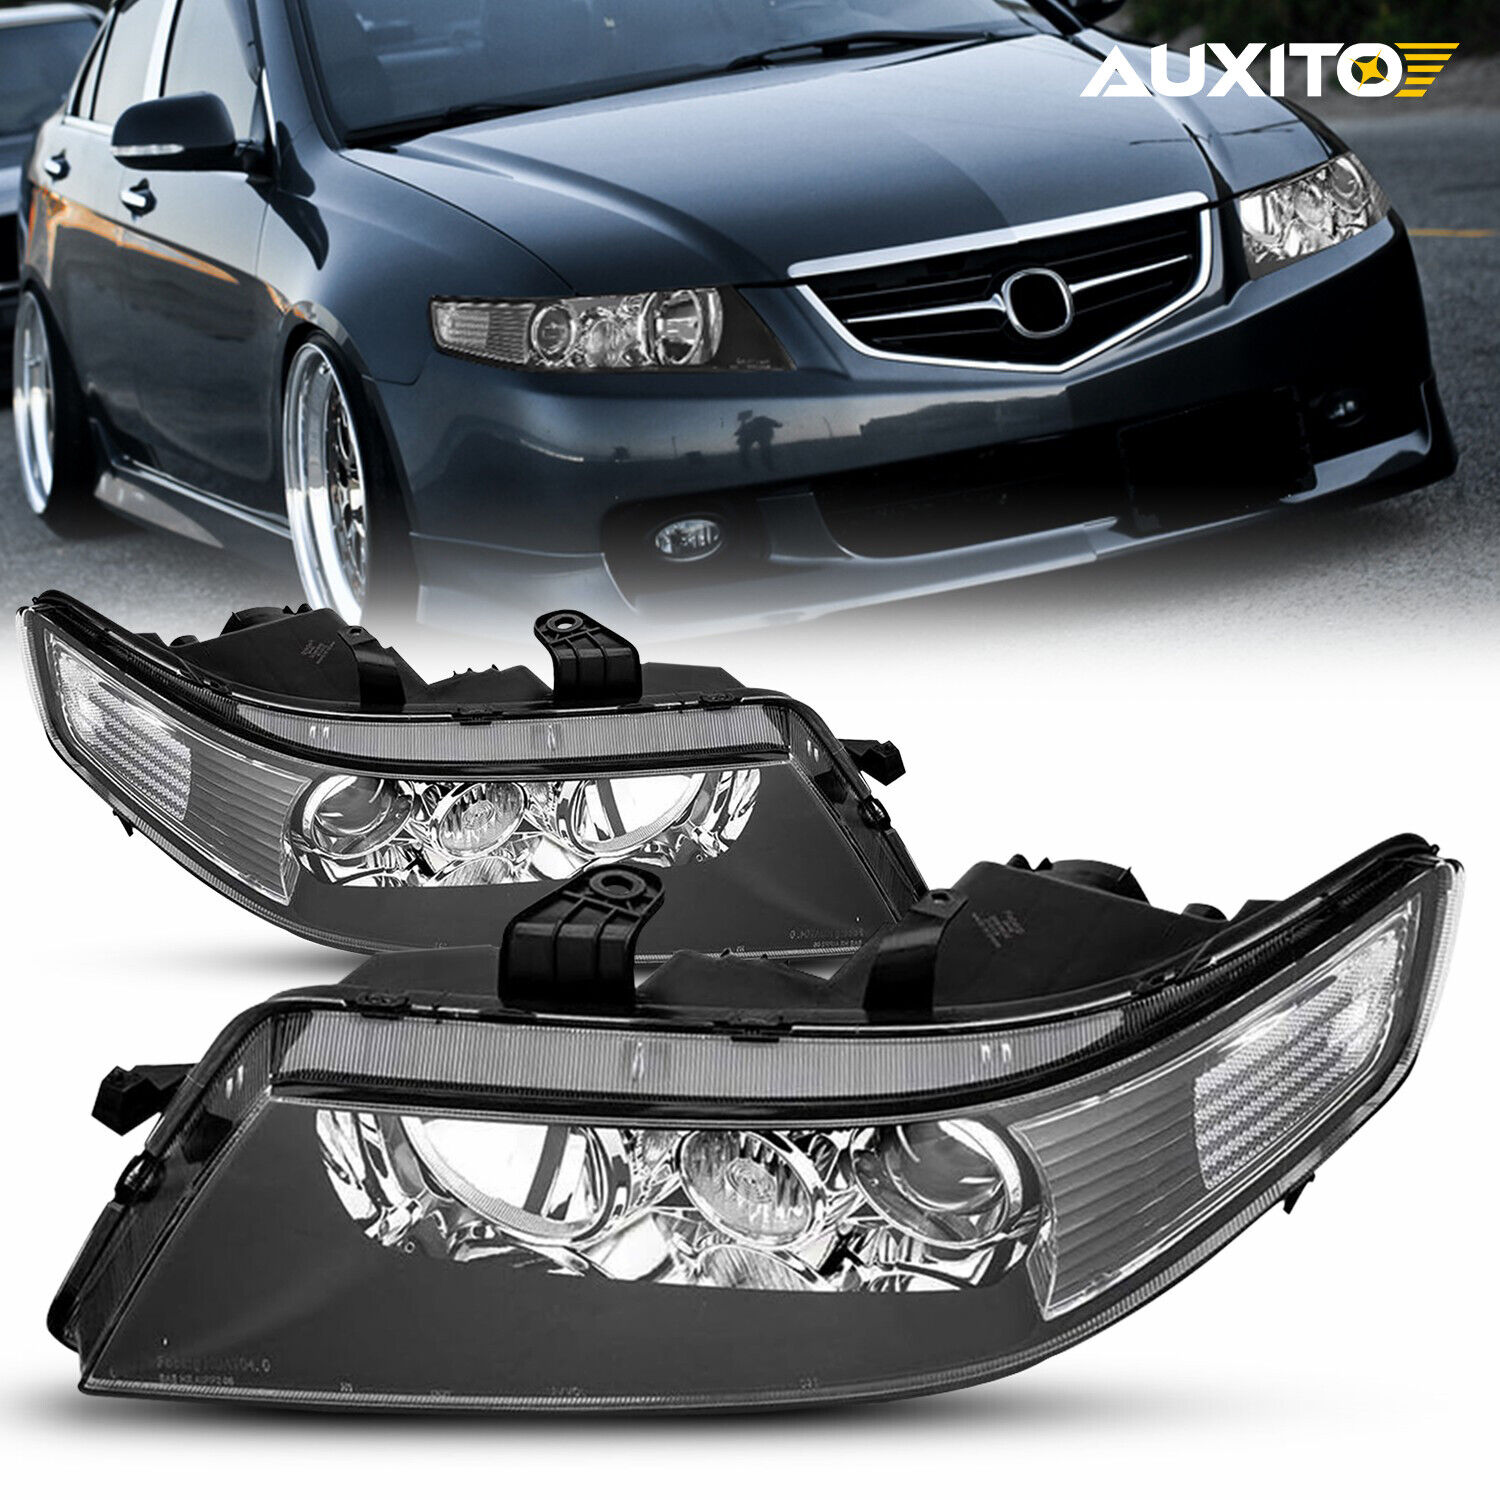 For 2004-2008 Acura TSX (CL9) Black Projector Headlights Headlamps Left+Right EW